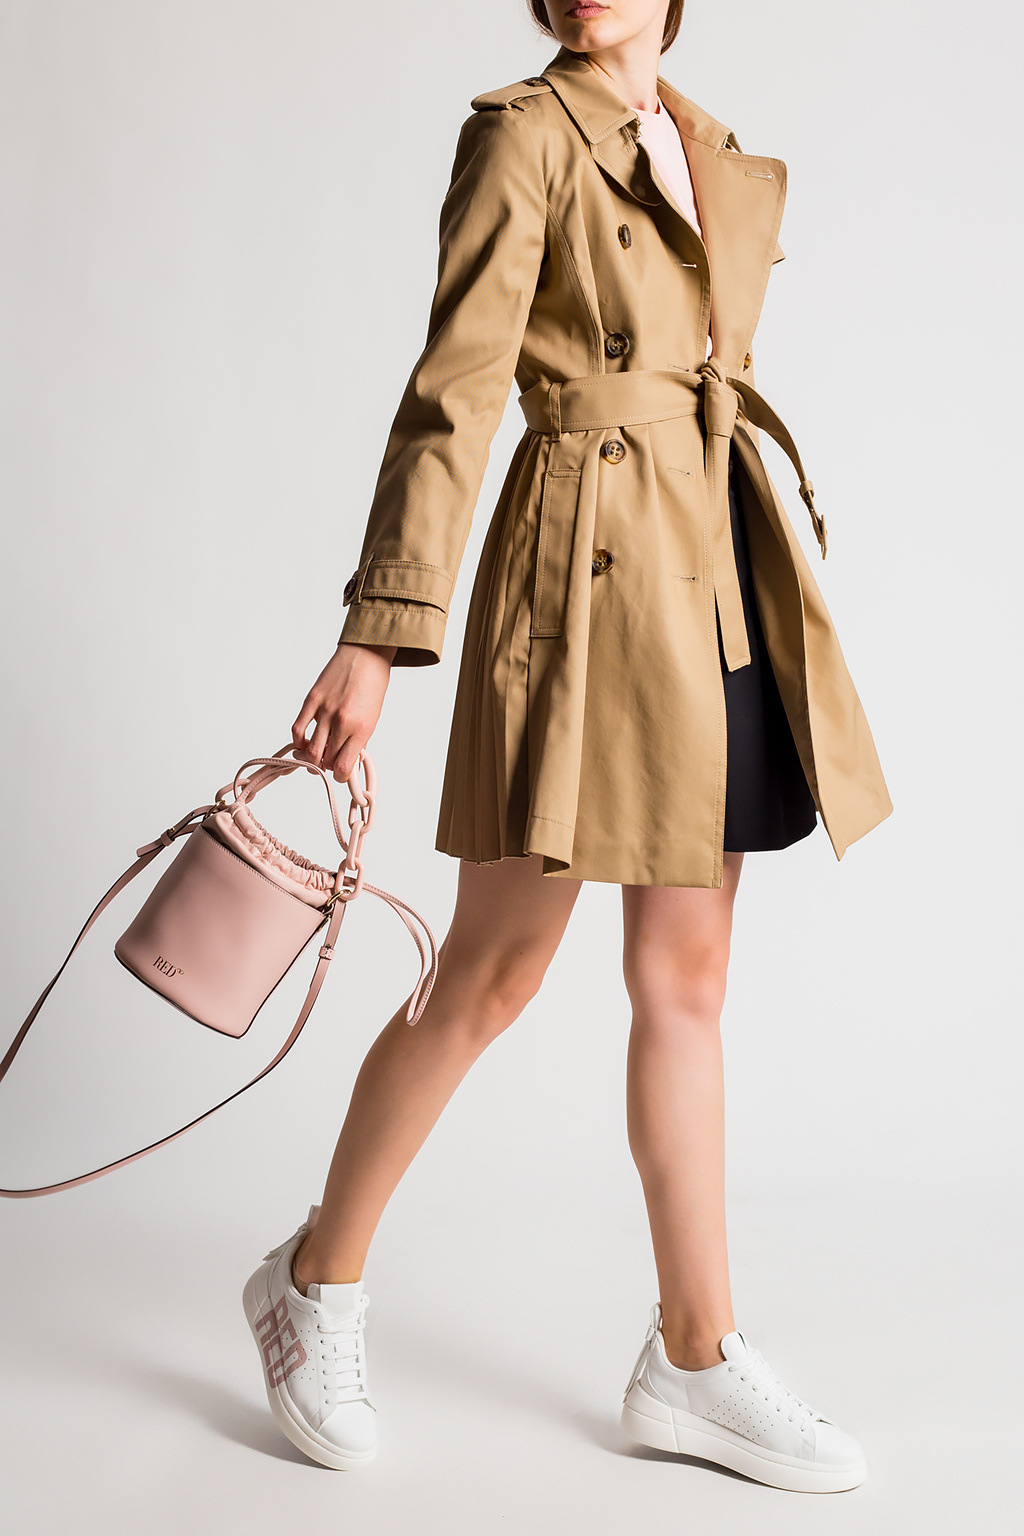 Red Valentino Double-breasted trench coat | Women's Clothing 